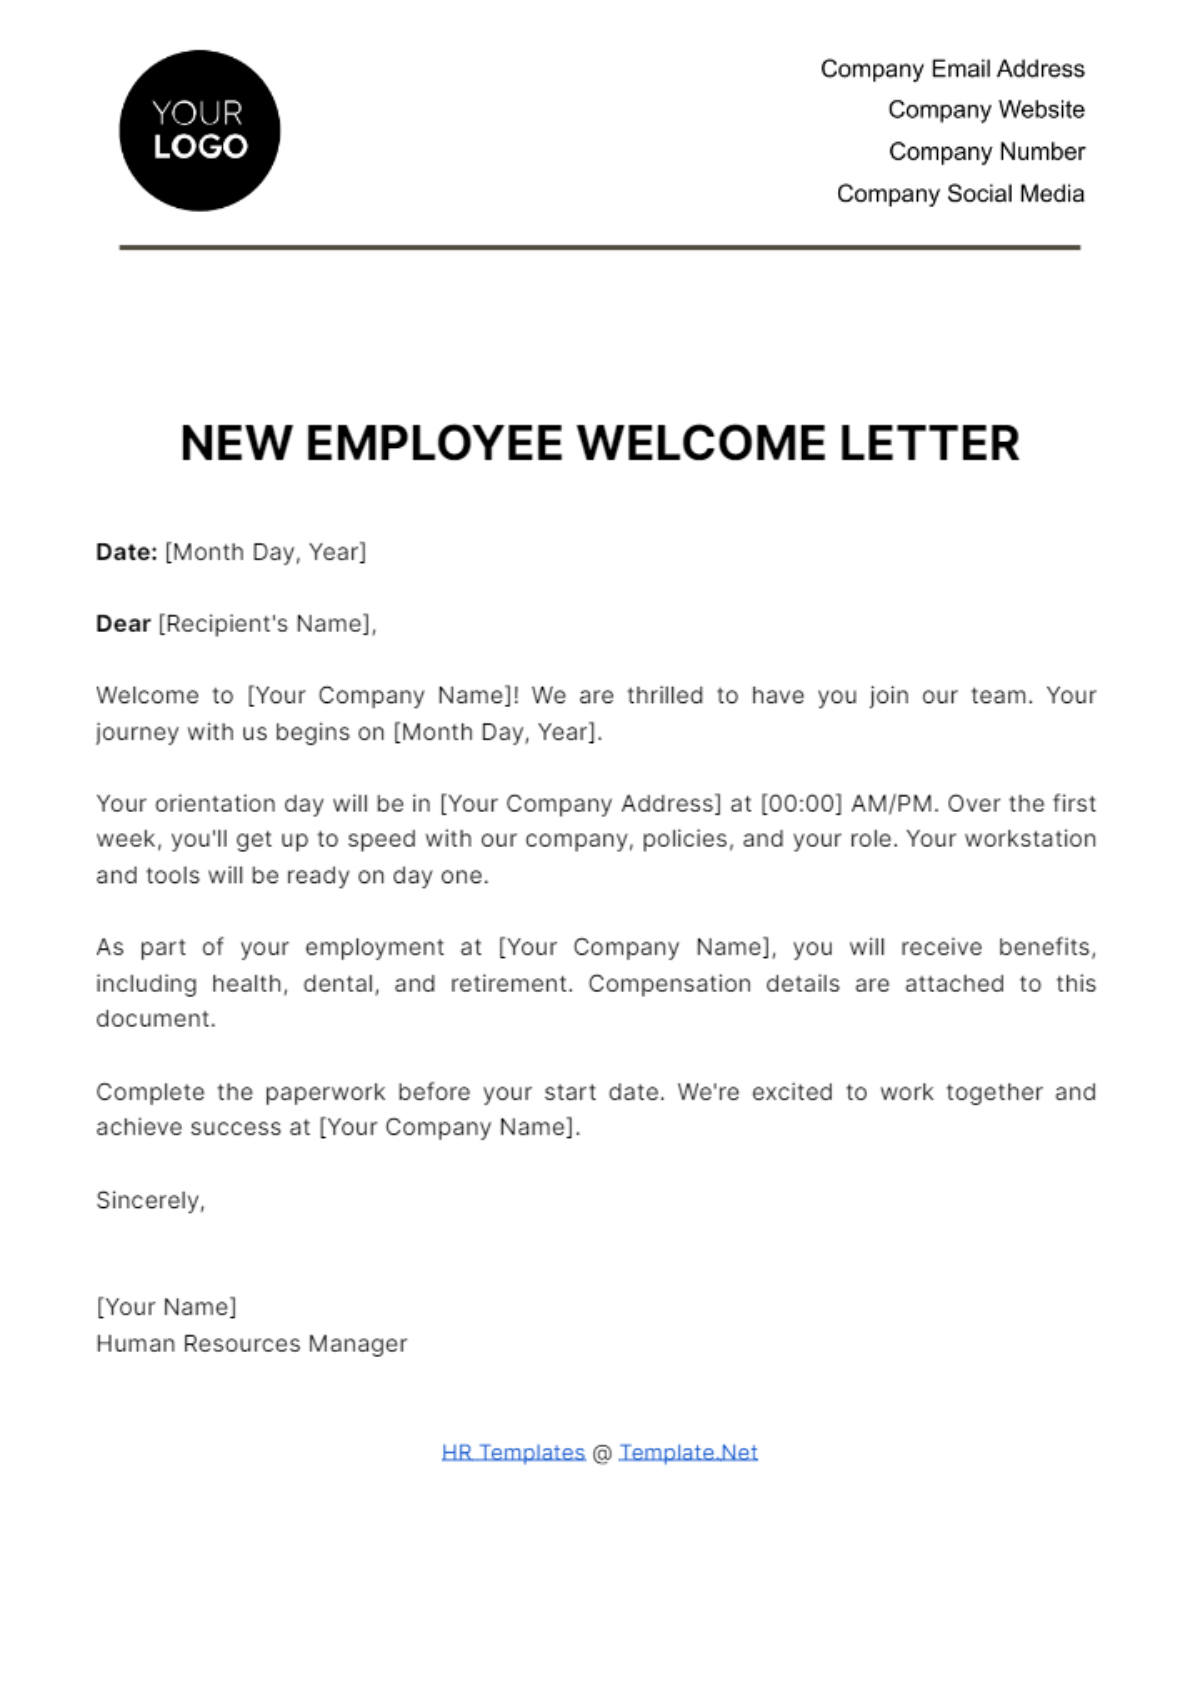 Free New Employee Welcome Letter HR Template